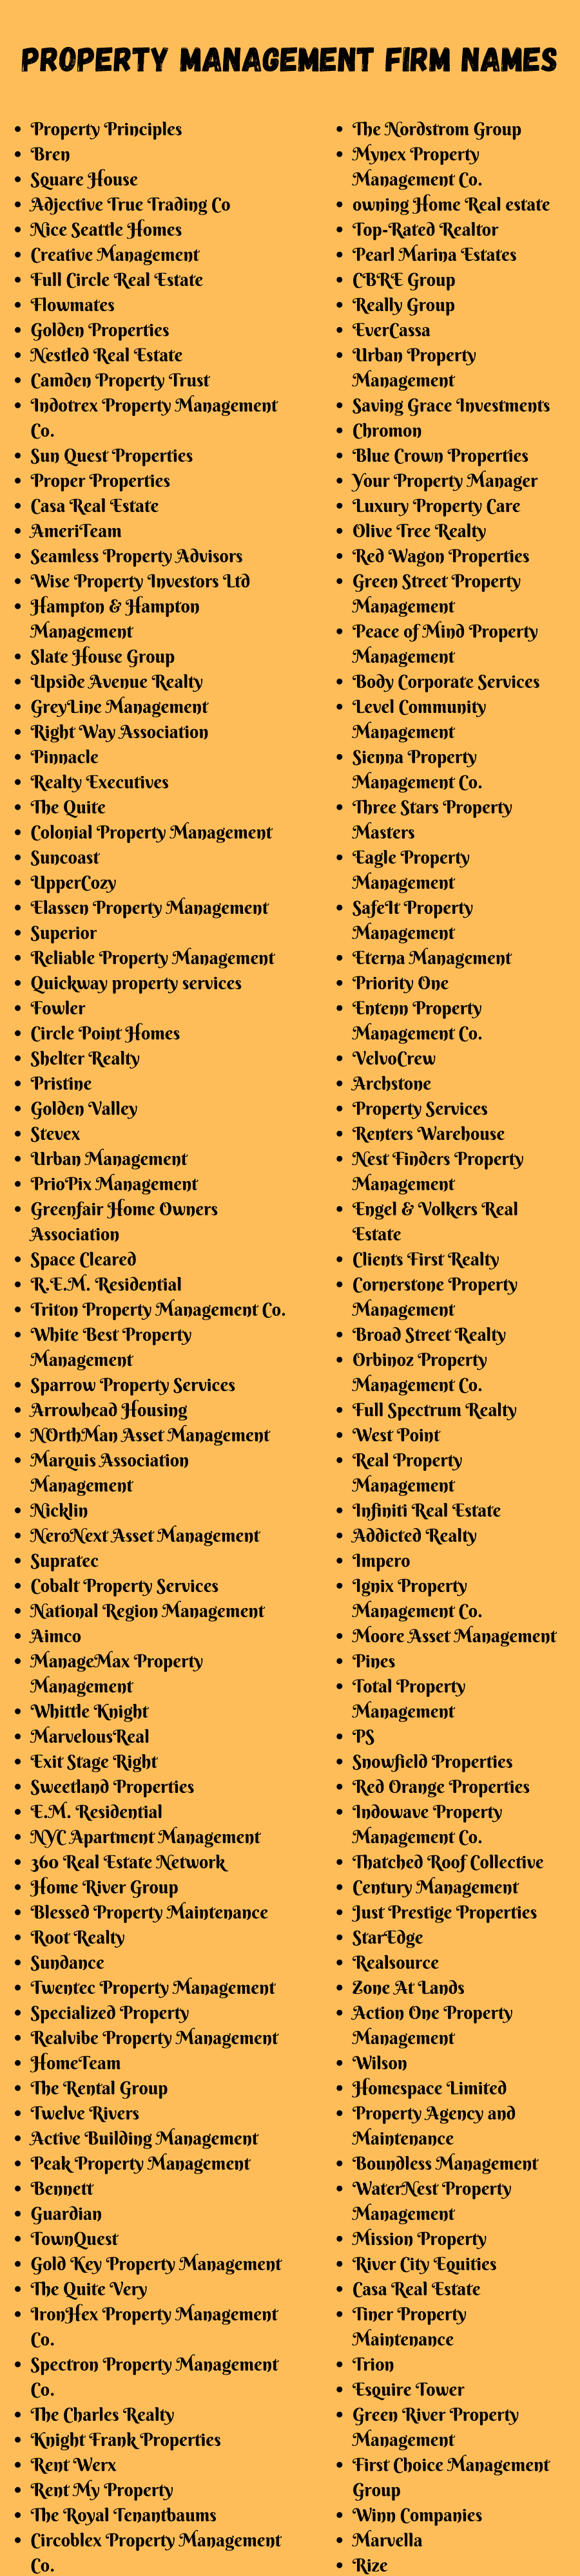 Property Management Firm Names